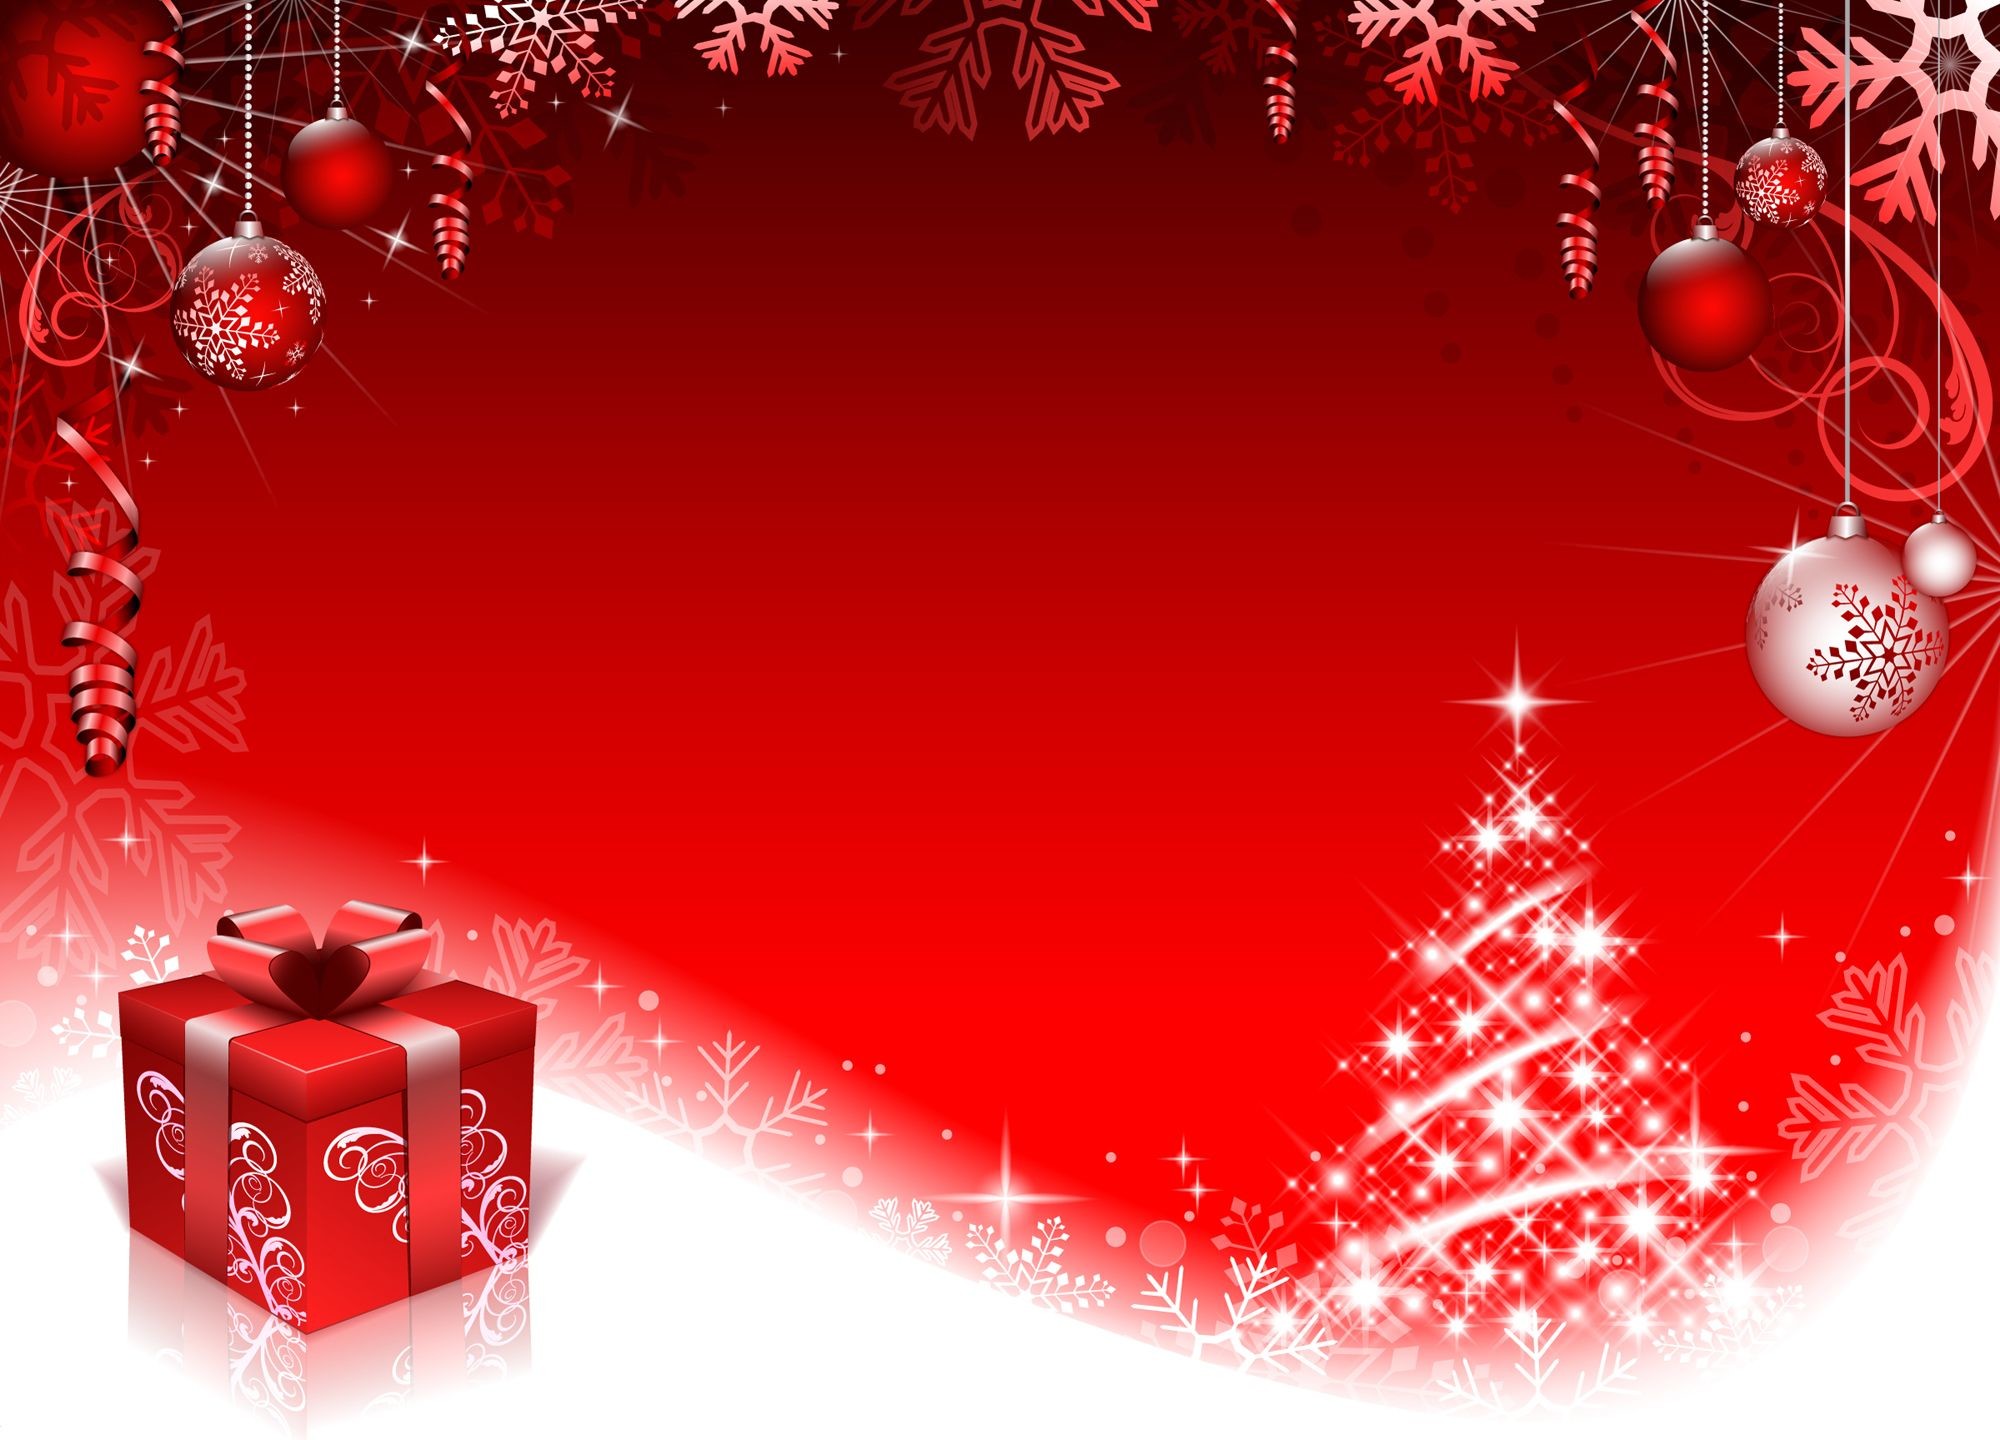 2000x1440 christmas backgrounds | Christmas Backgrounds for Photoshop | Wallpapers9